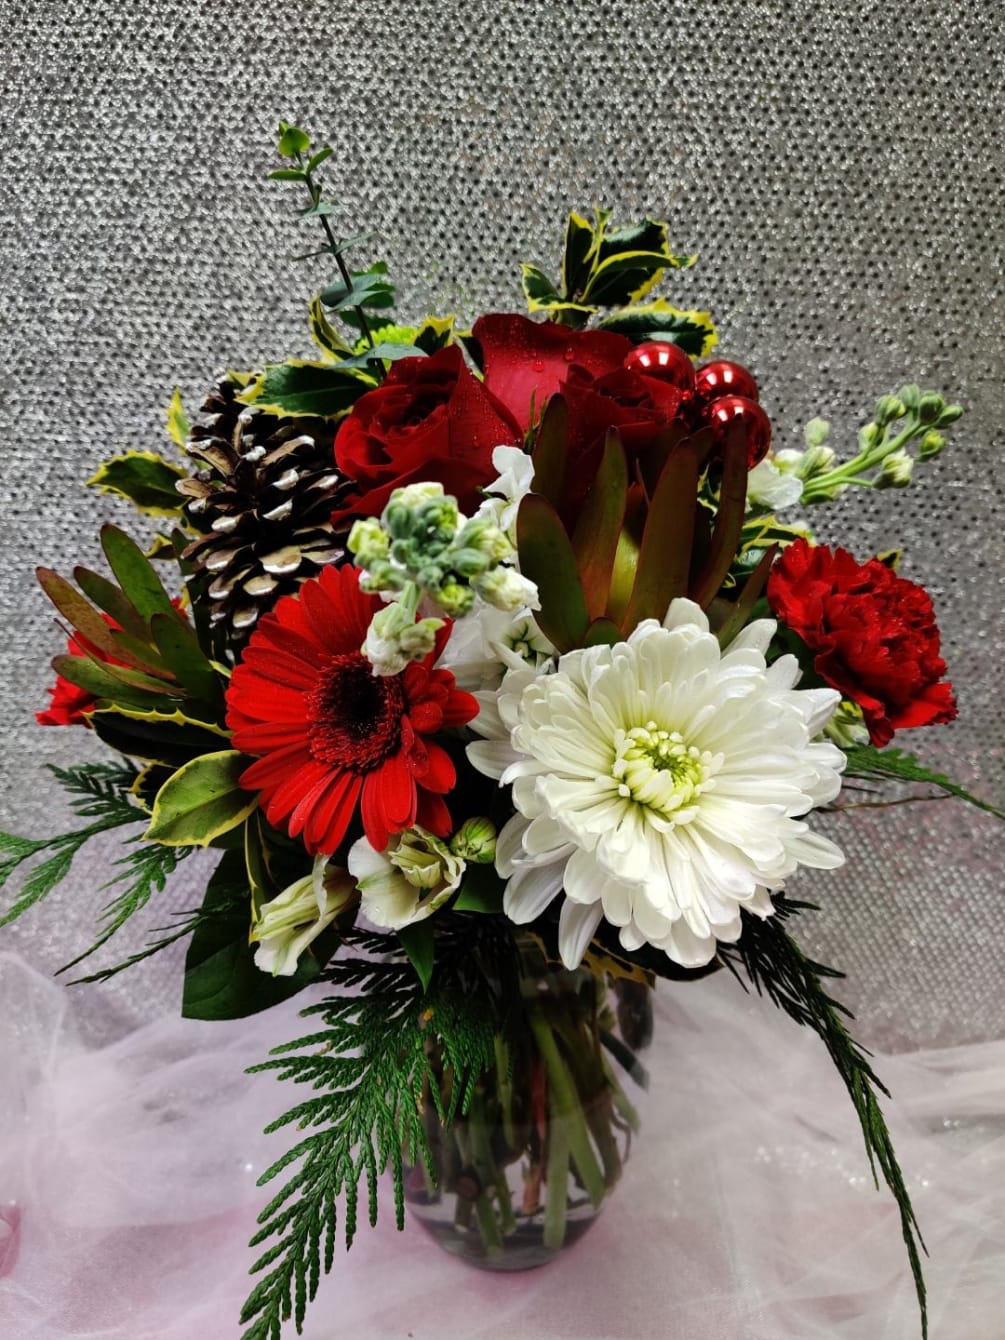 This wonderful holiday arrangement is made beautifully using red roses, gerbera daisies